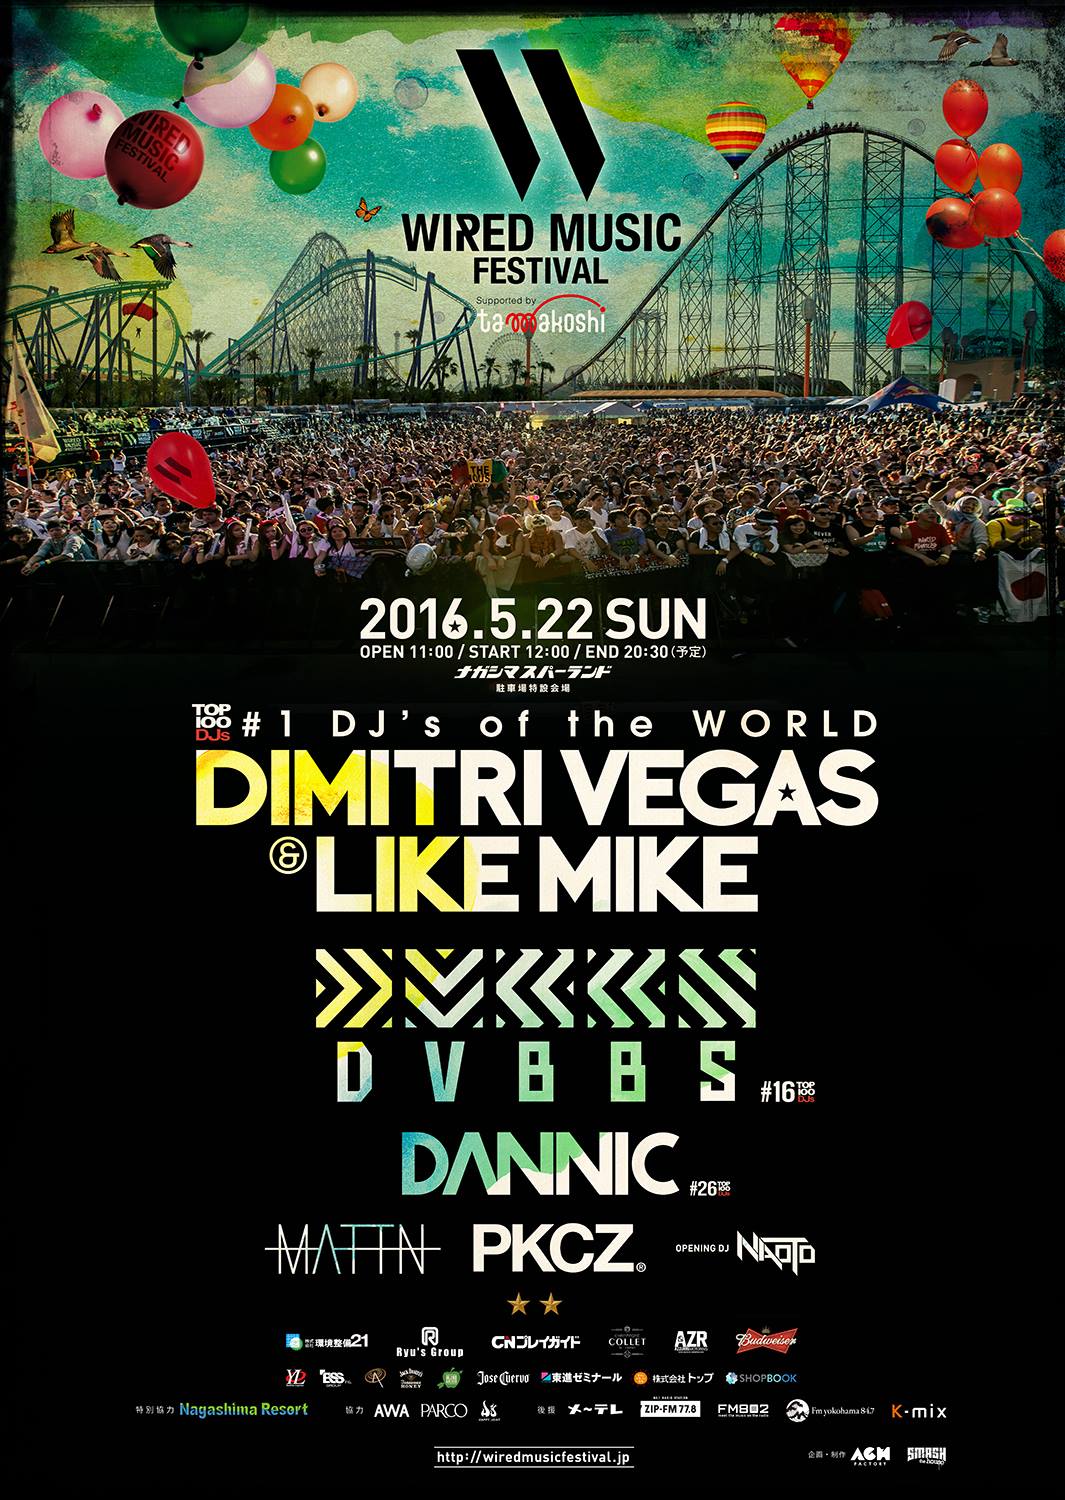 WIRED MUSIC FESTIVAL 2016 FIX